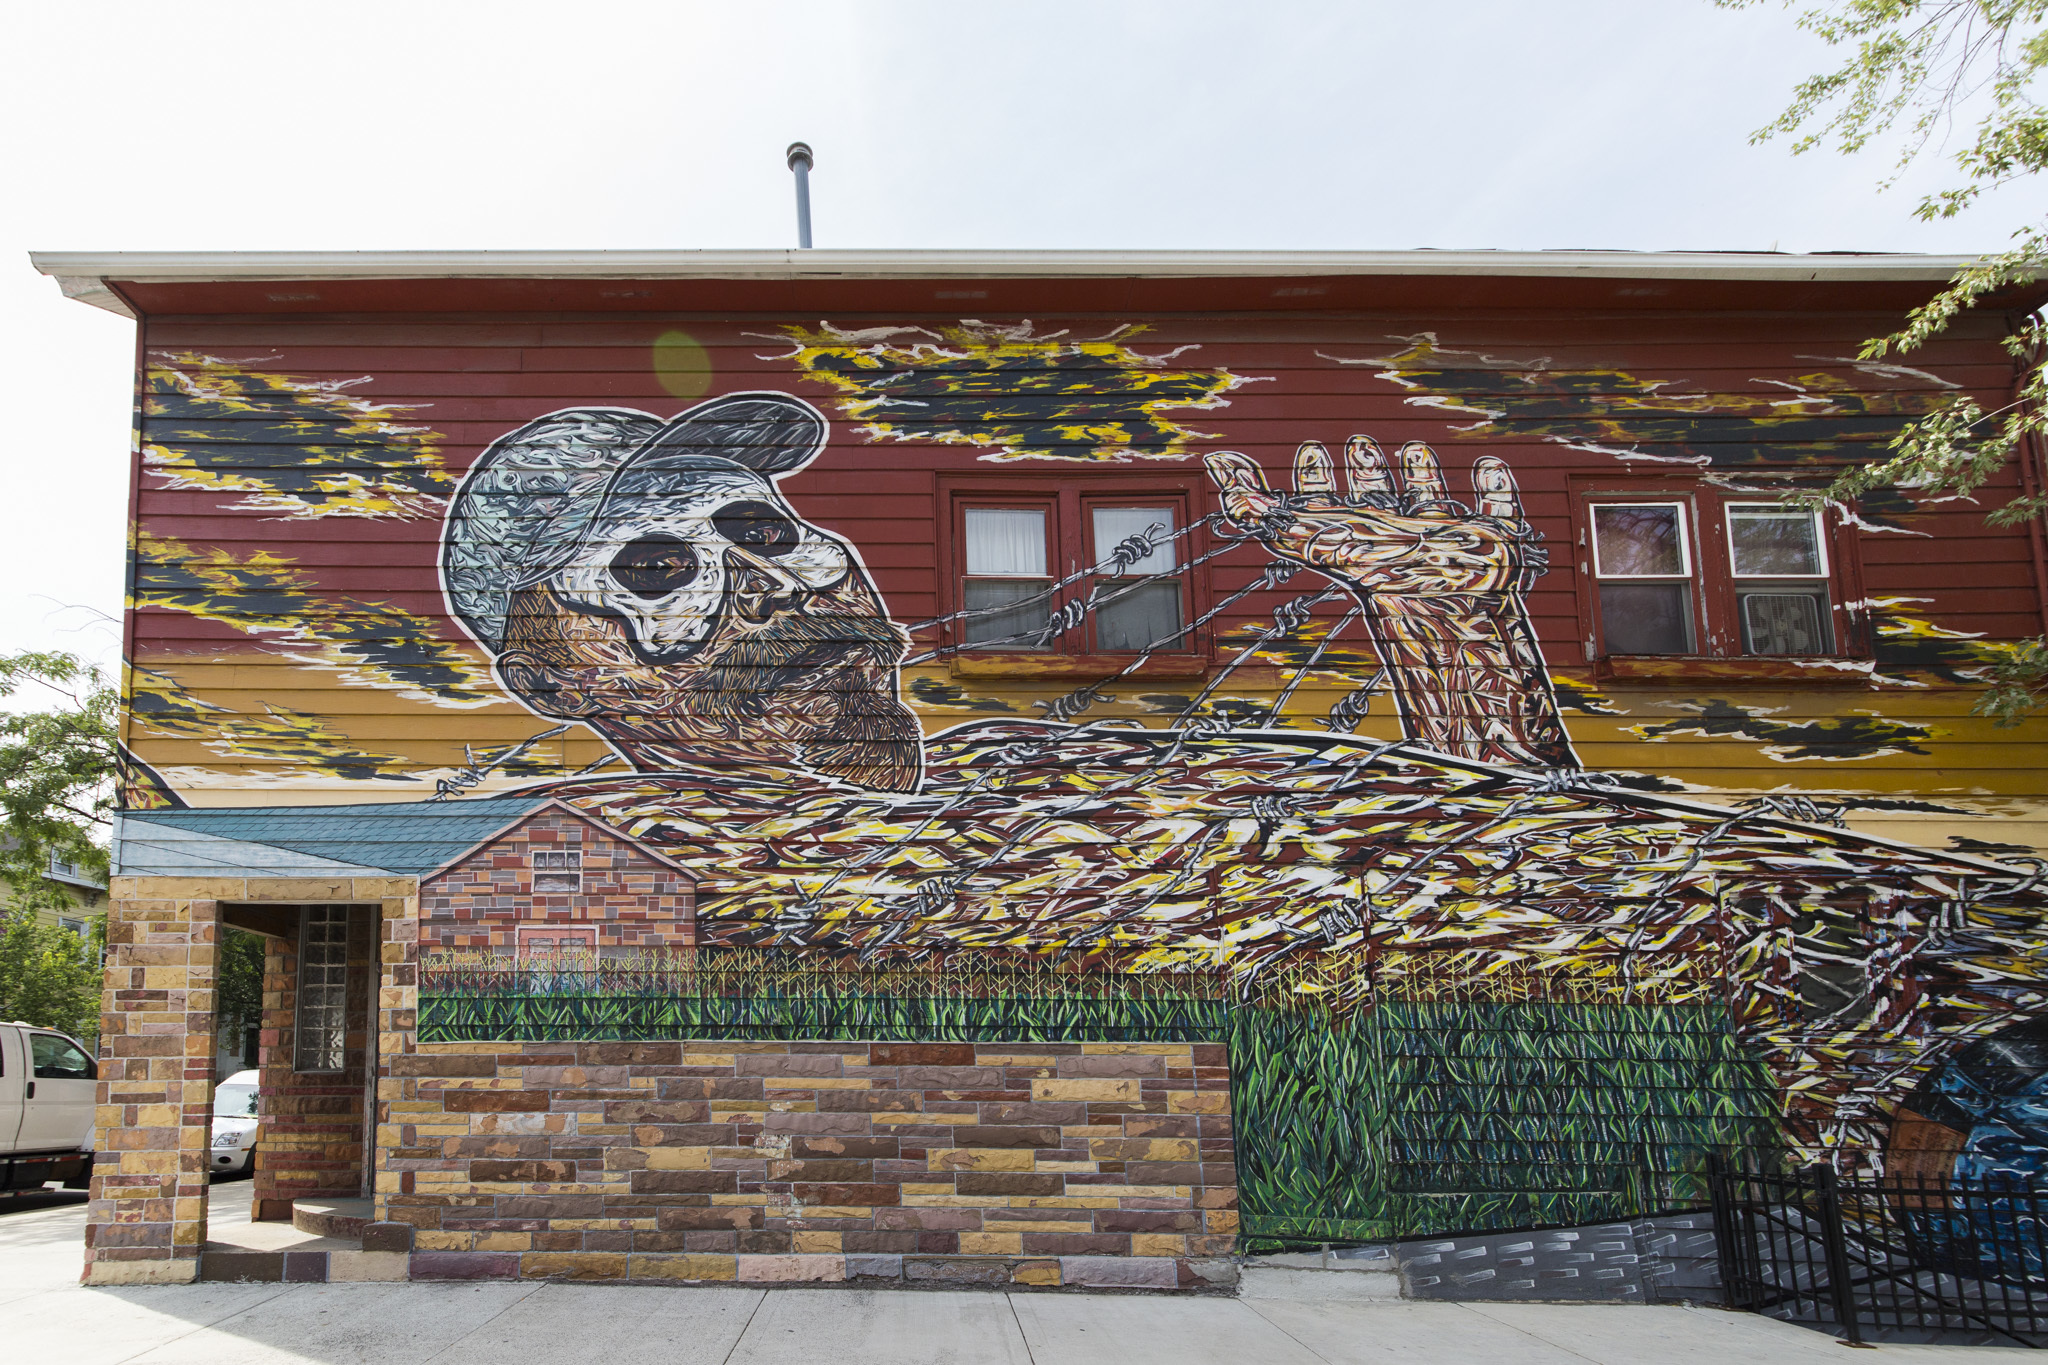 15 signs you know you're in Pilsen